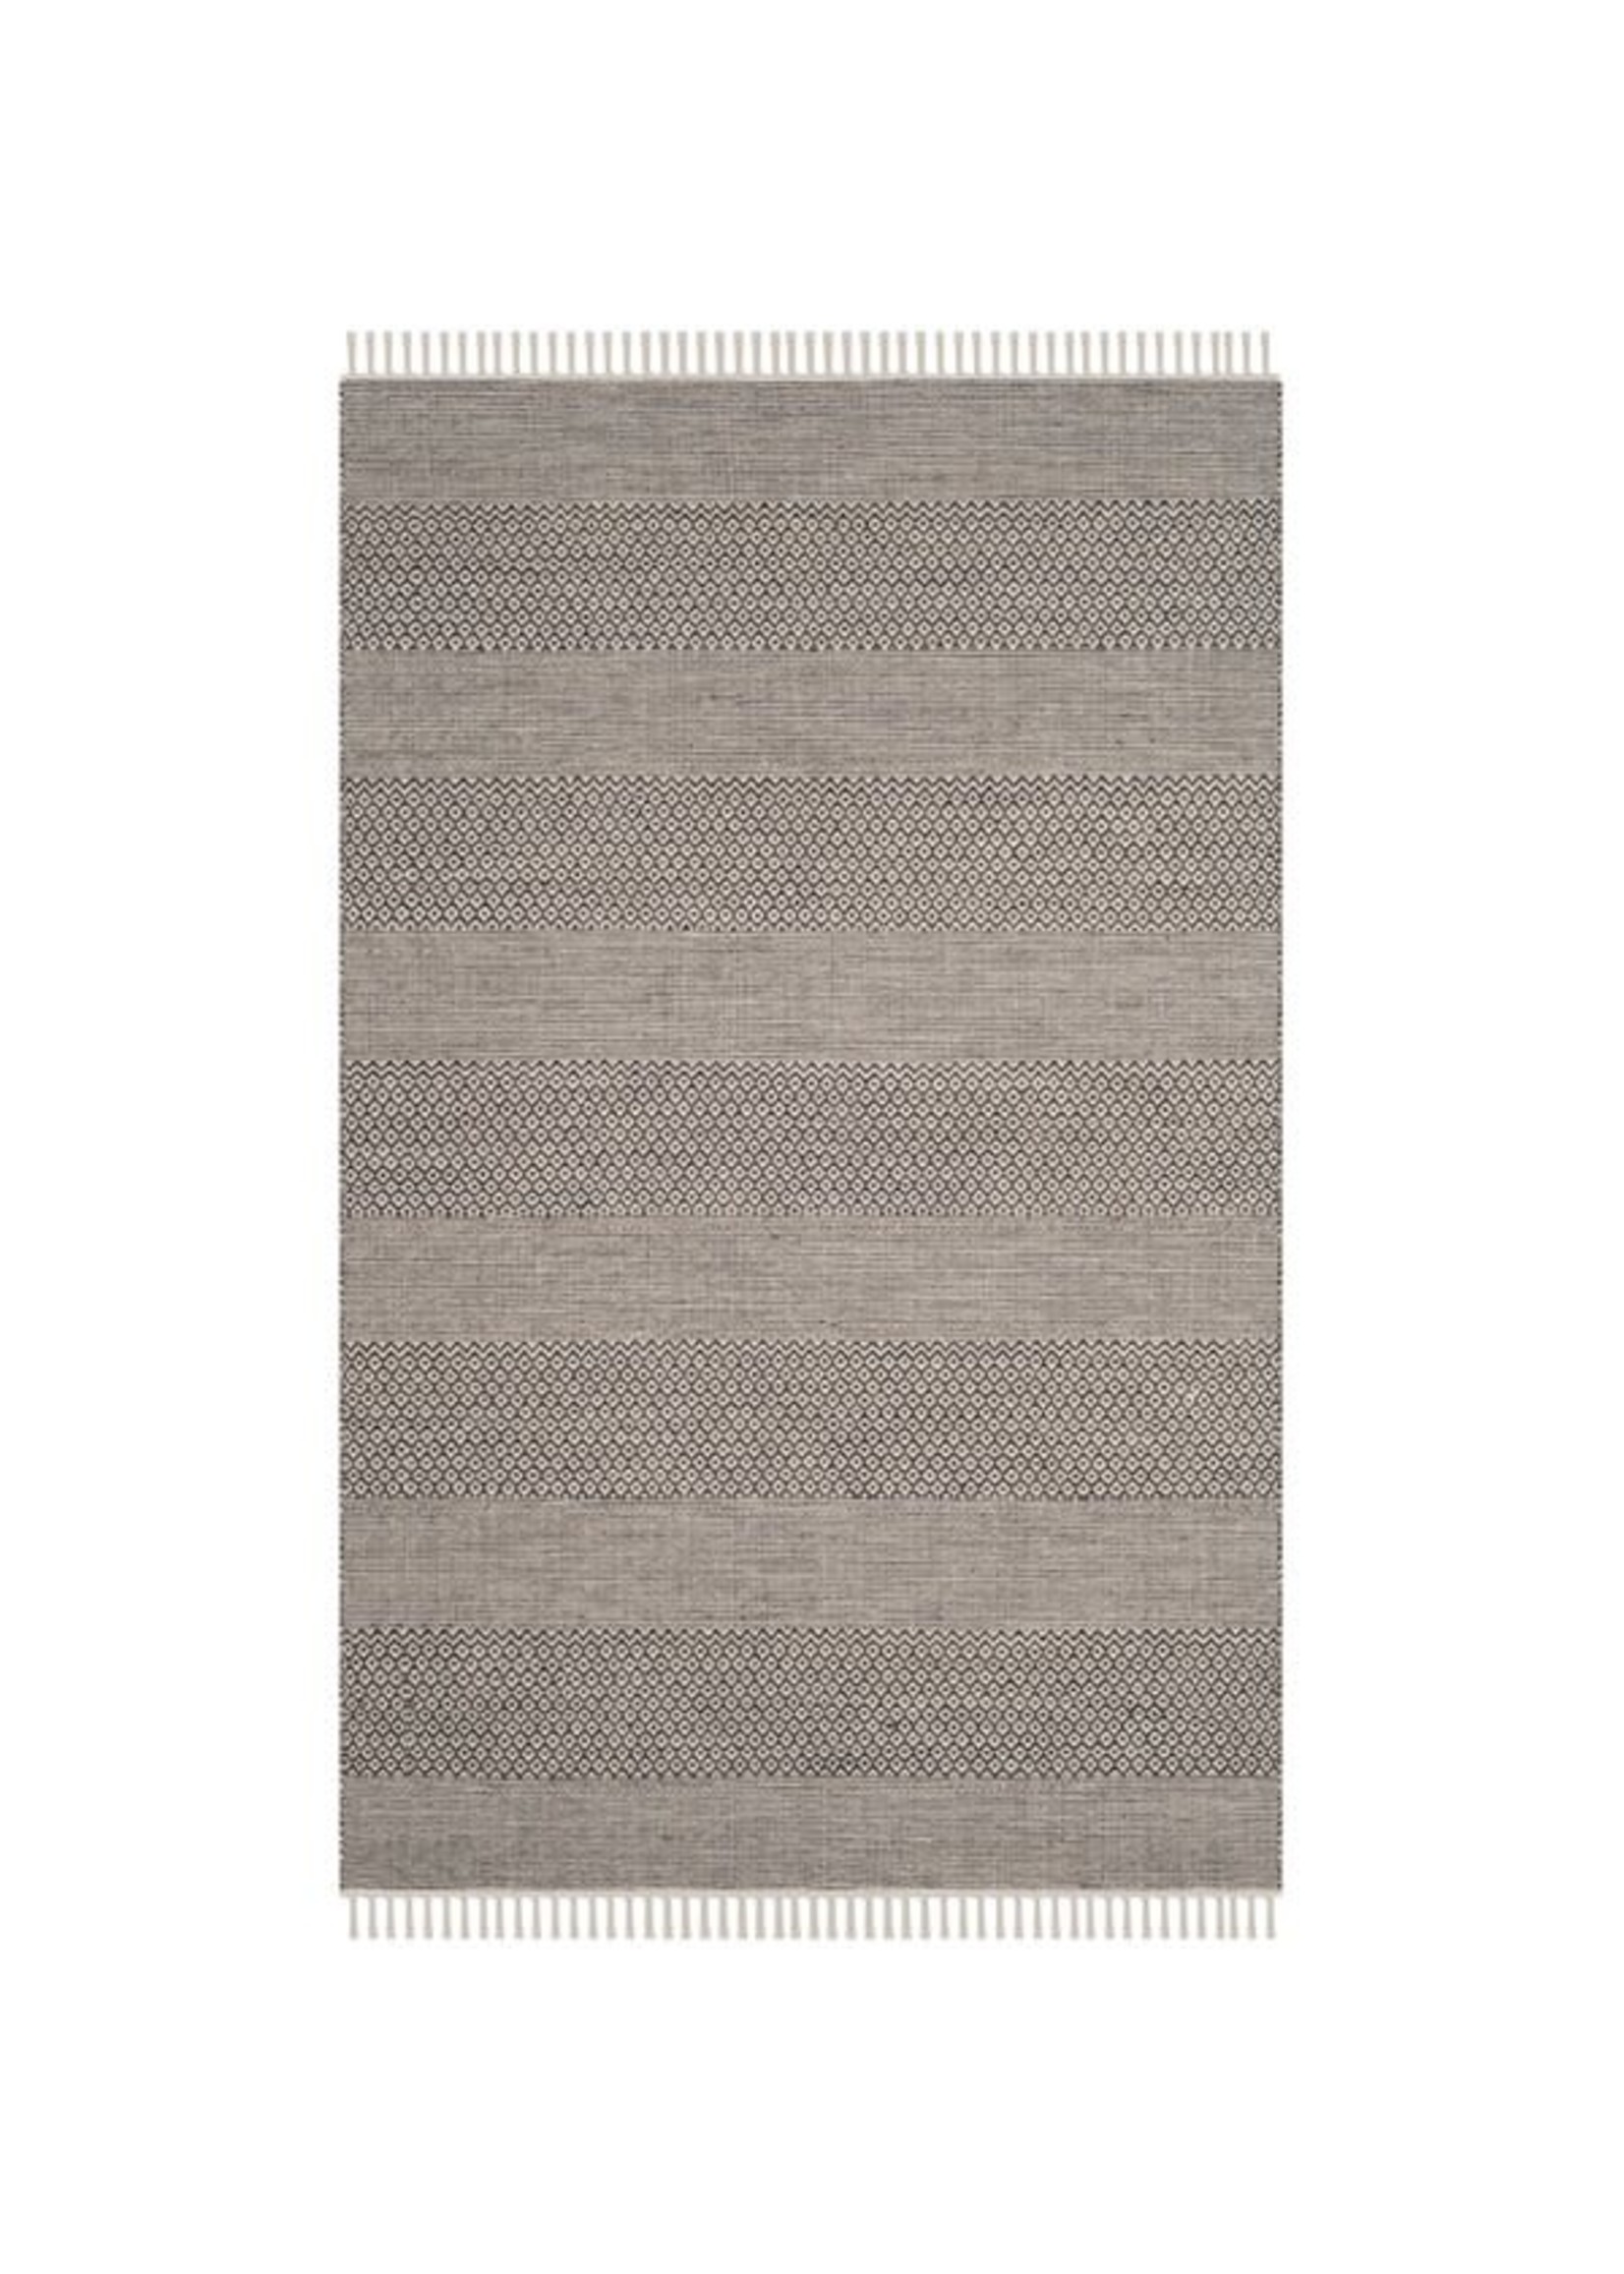 *2'3 x 6' Bester Jodi Striped Hand-Woven Flatweave Cotton Ivory/Anthracite Area Rug